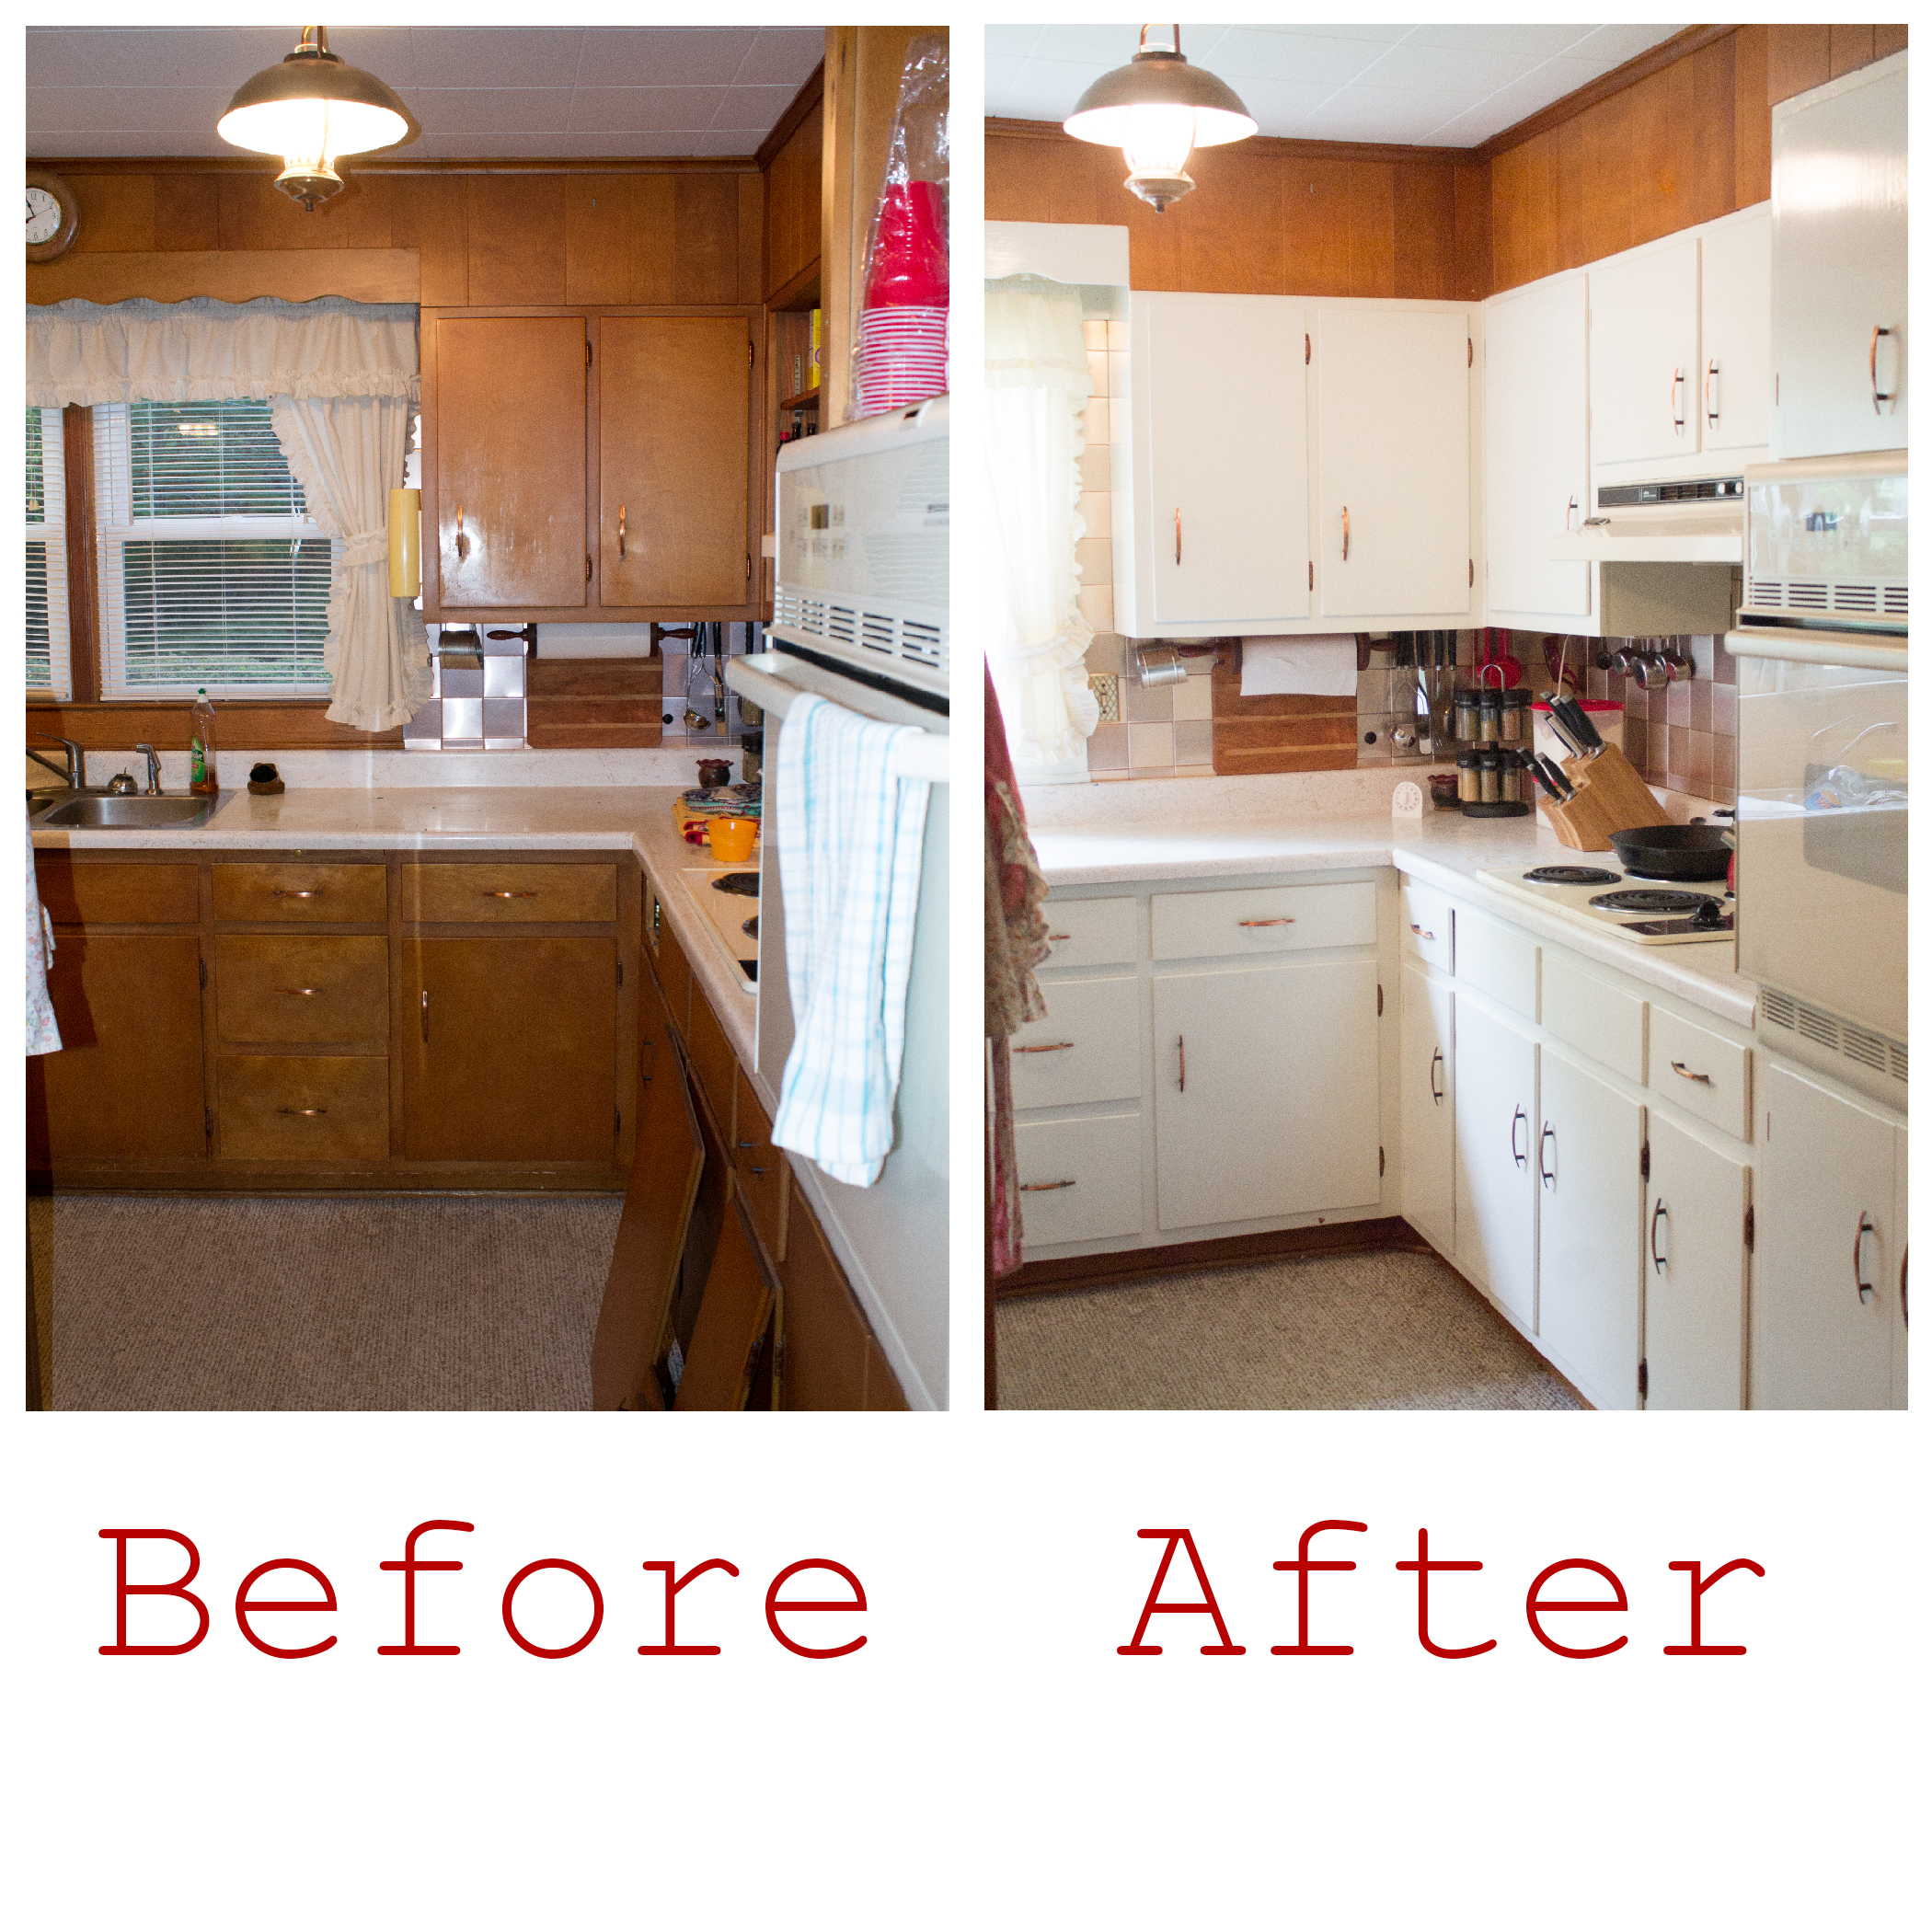 Kitchen: Before and After